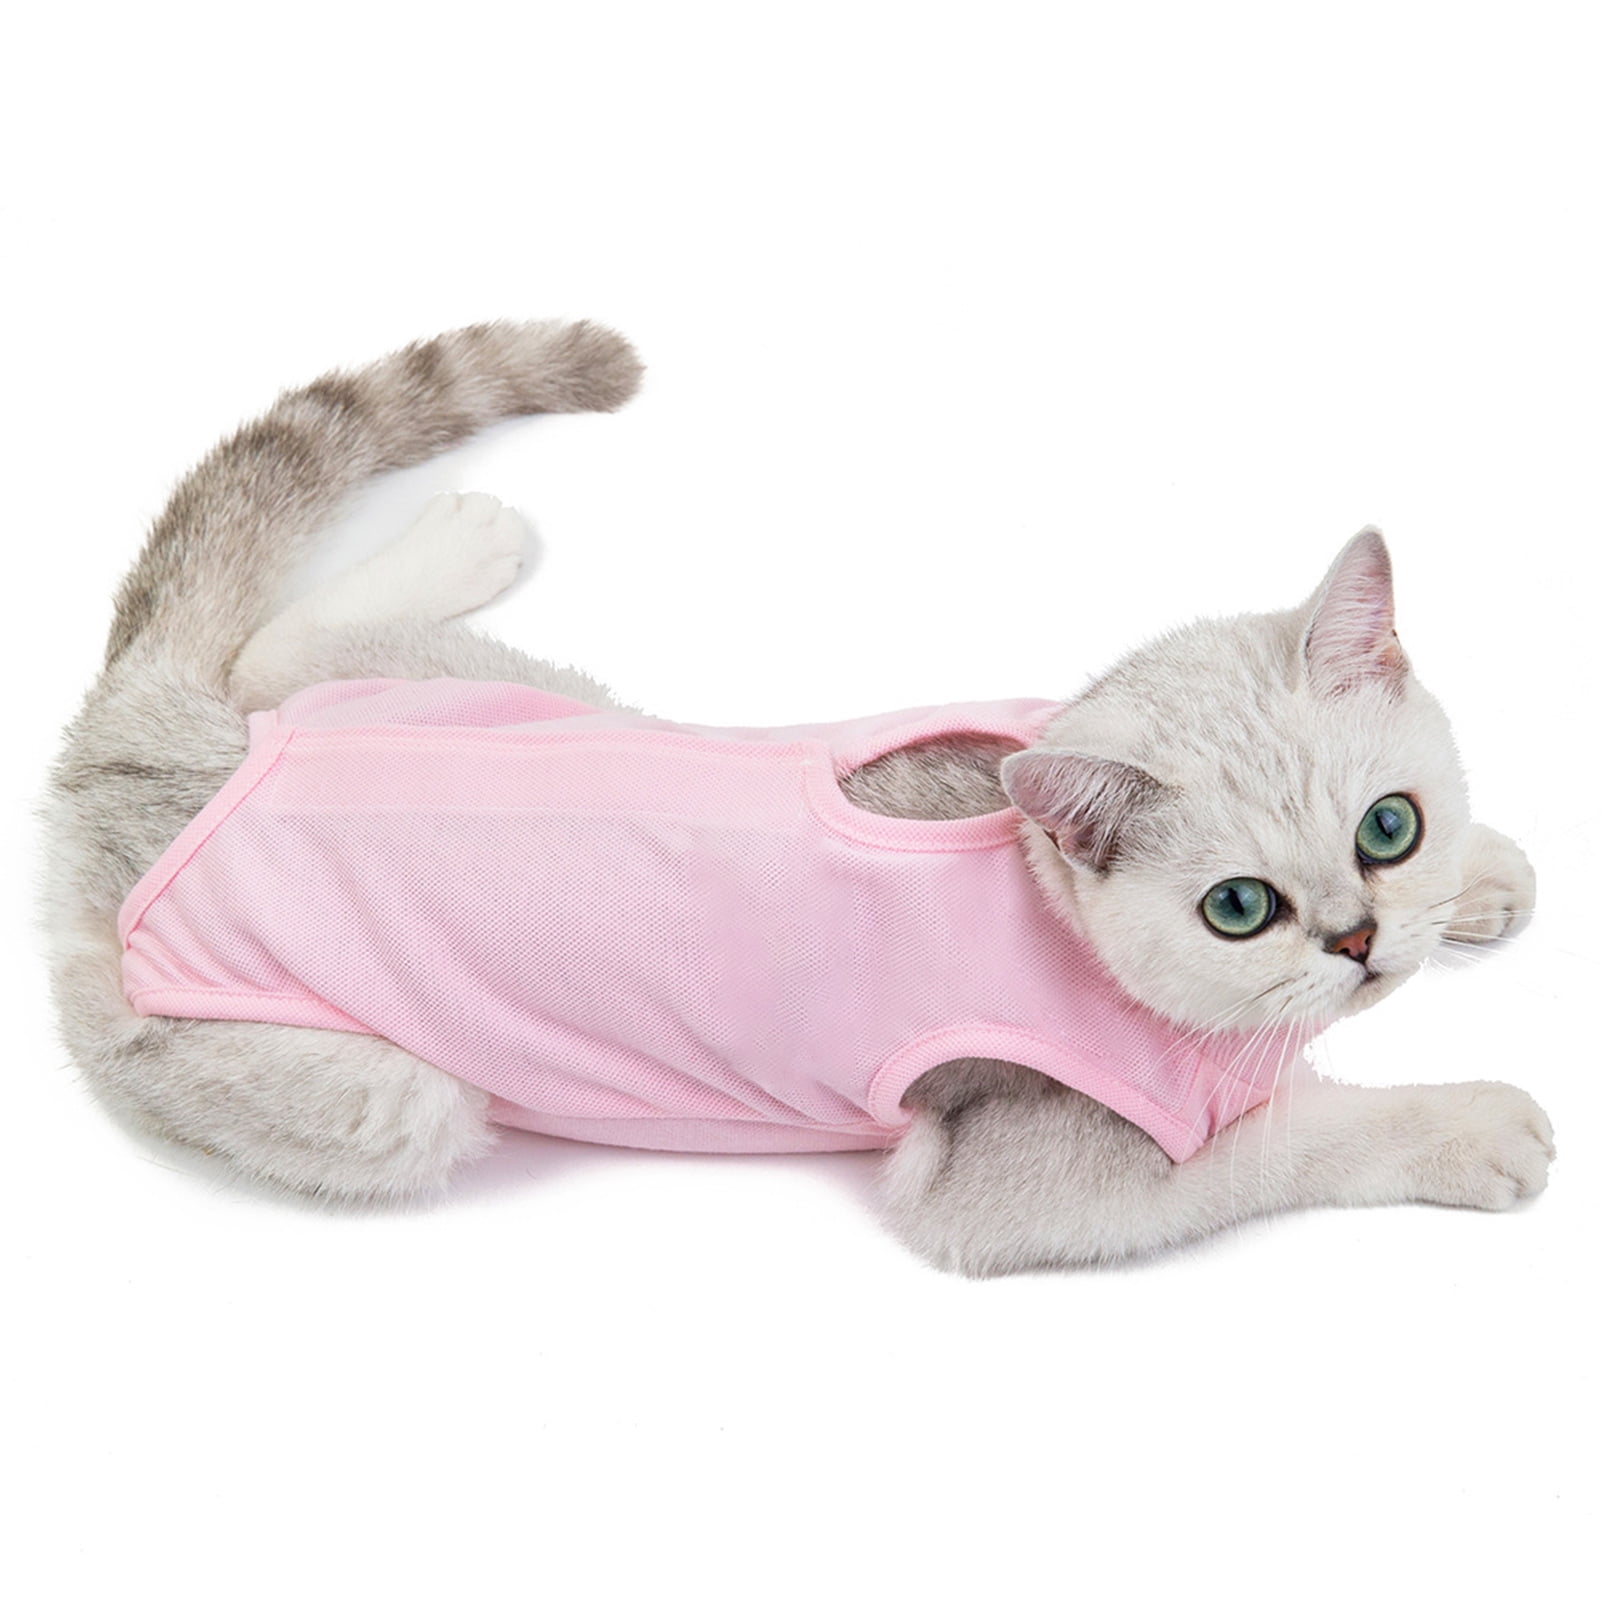 Dropship Sterilization Clothing For Cats In Summer, Thin Female Cat  Surgical Clothes, Weaning Clothing, Licking-proof And Hair-shedding-proof  Clothing For Cats After Ventilation to Sell Online at a Lower Price